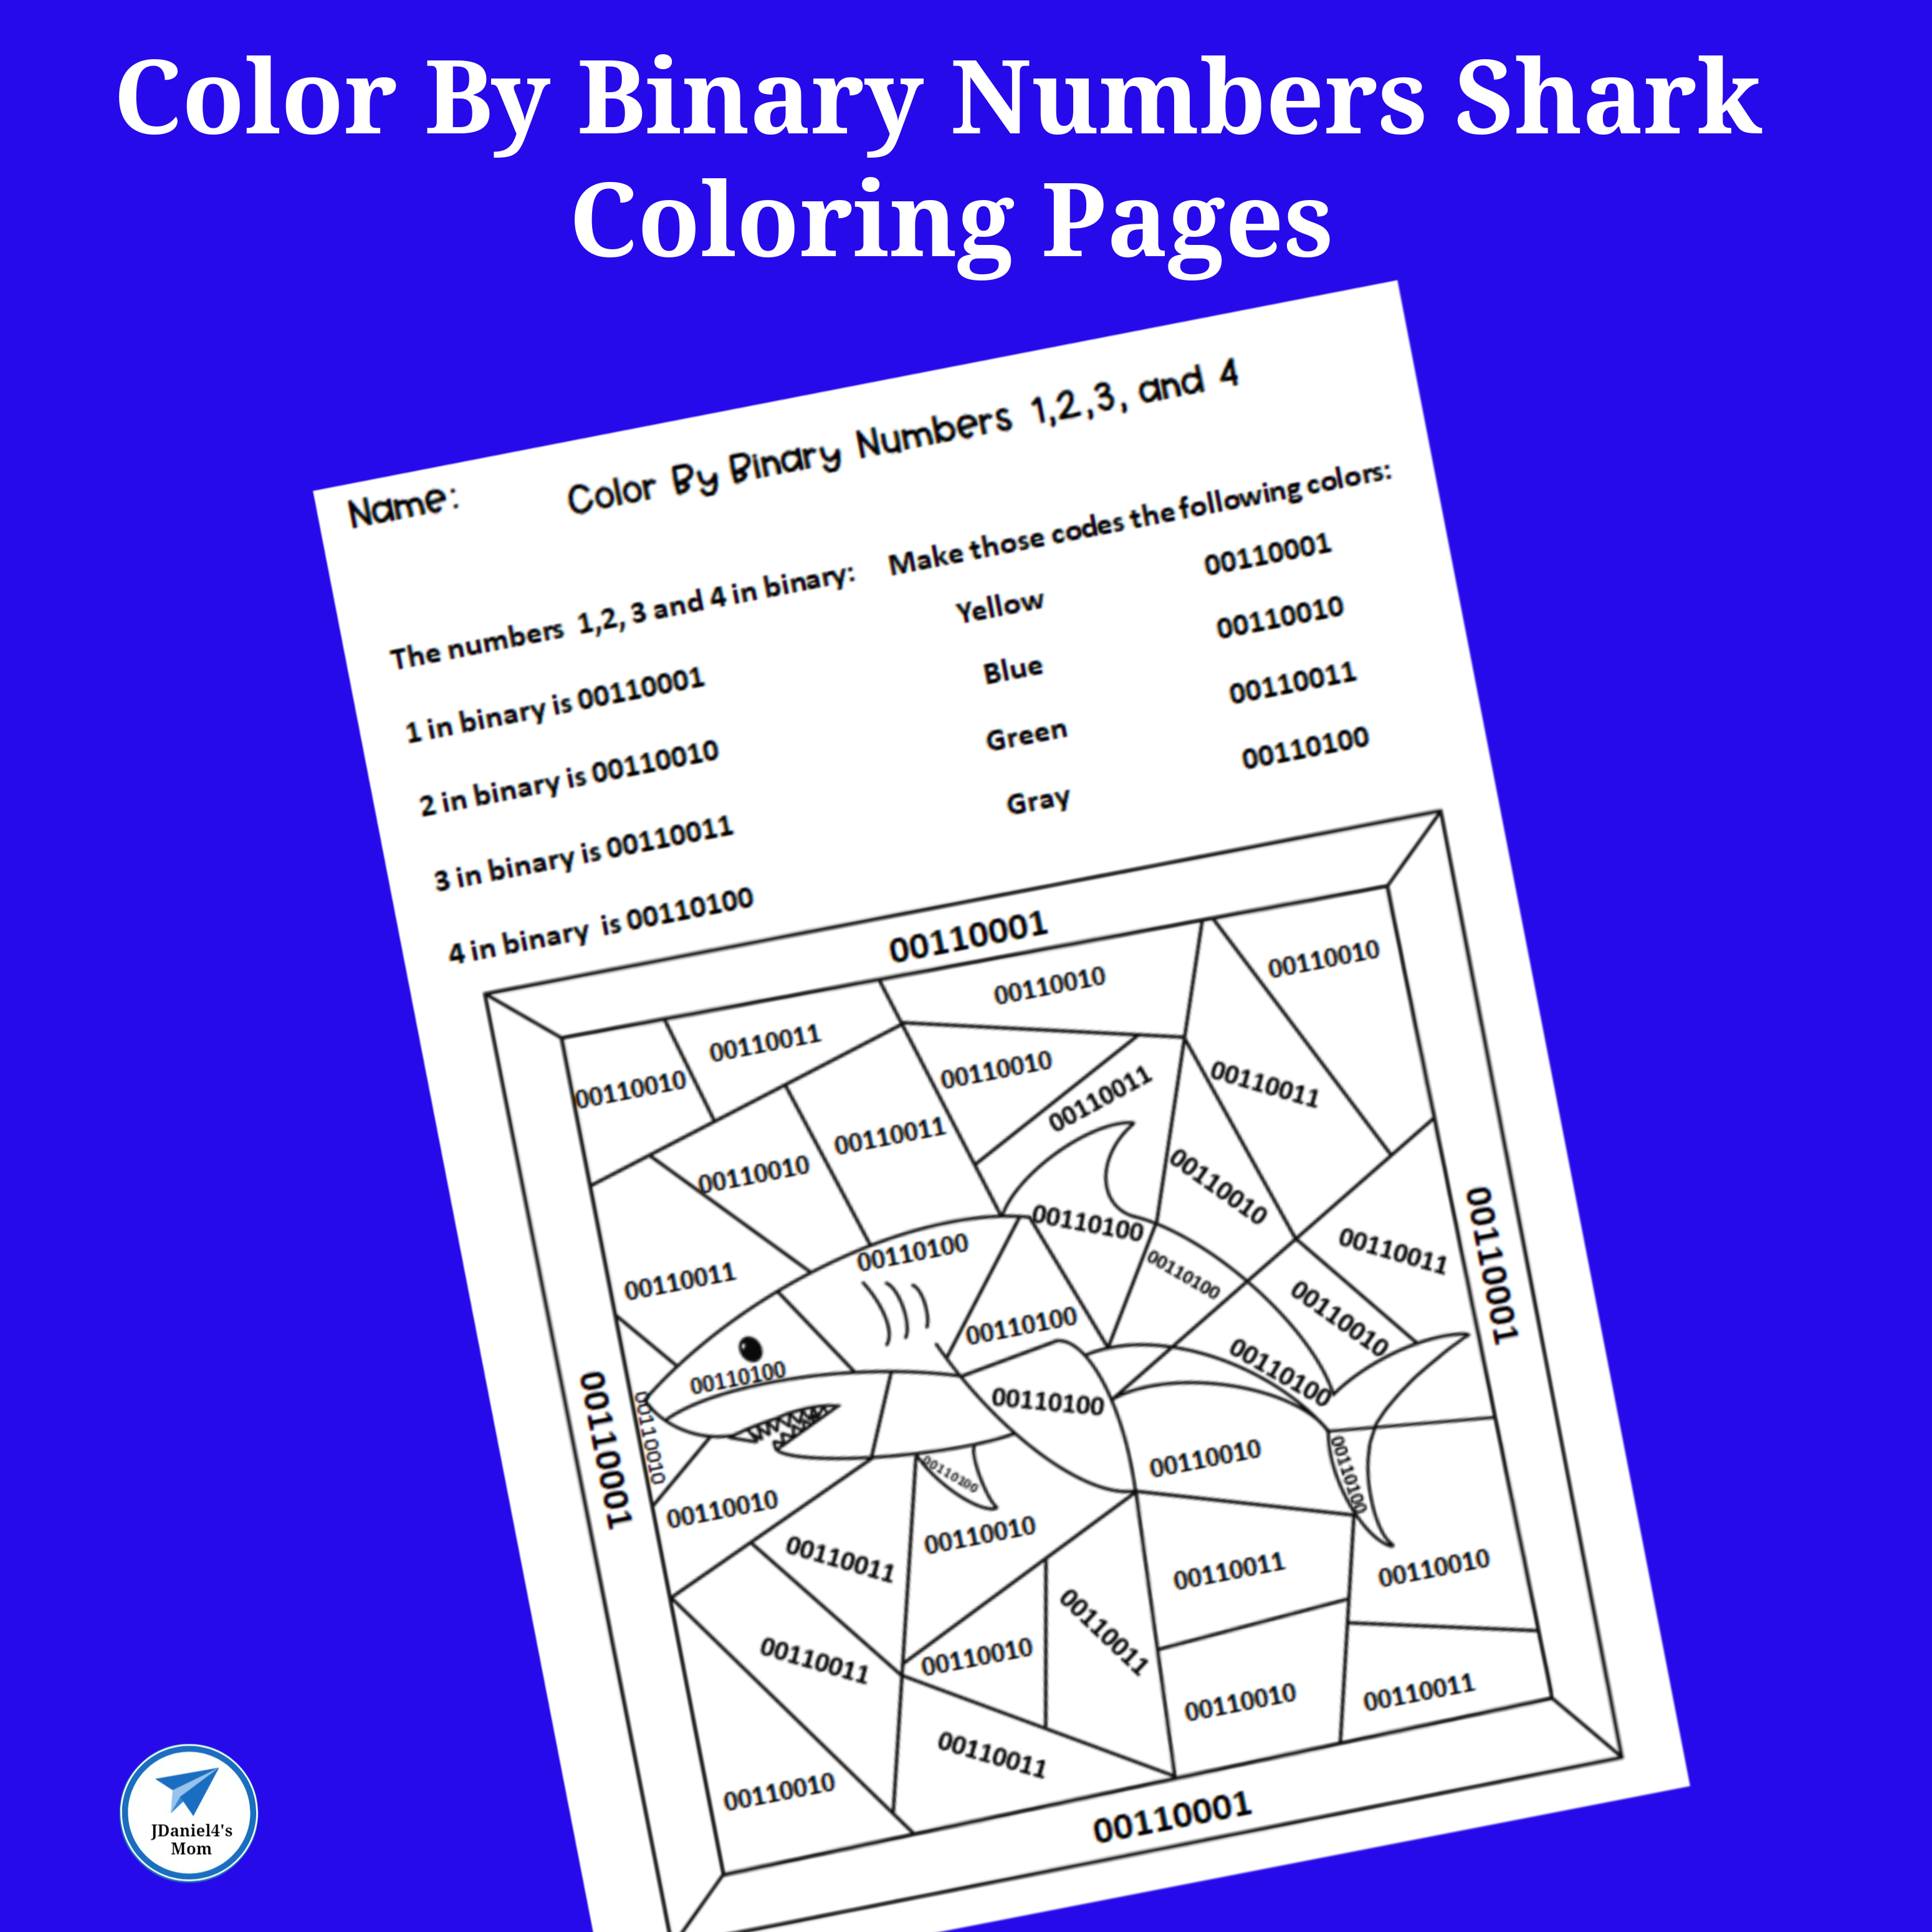 Color by binary numbers shark coloring pages